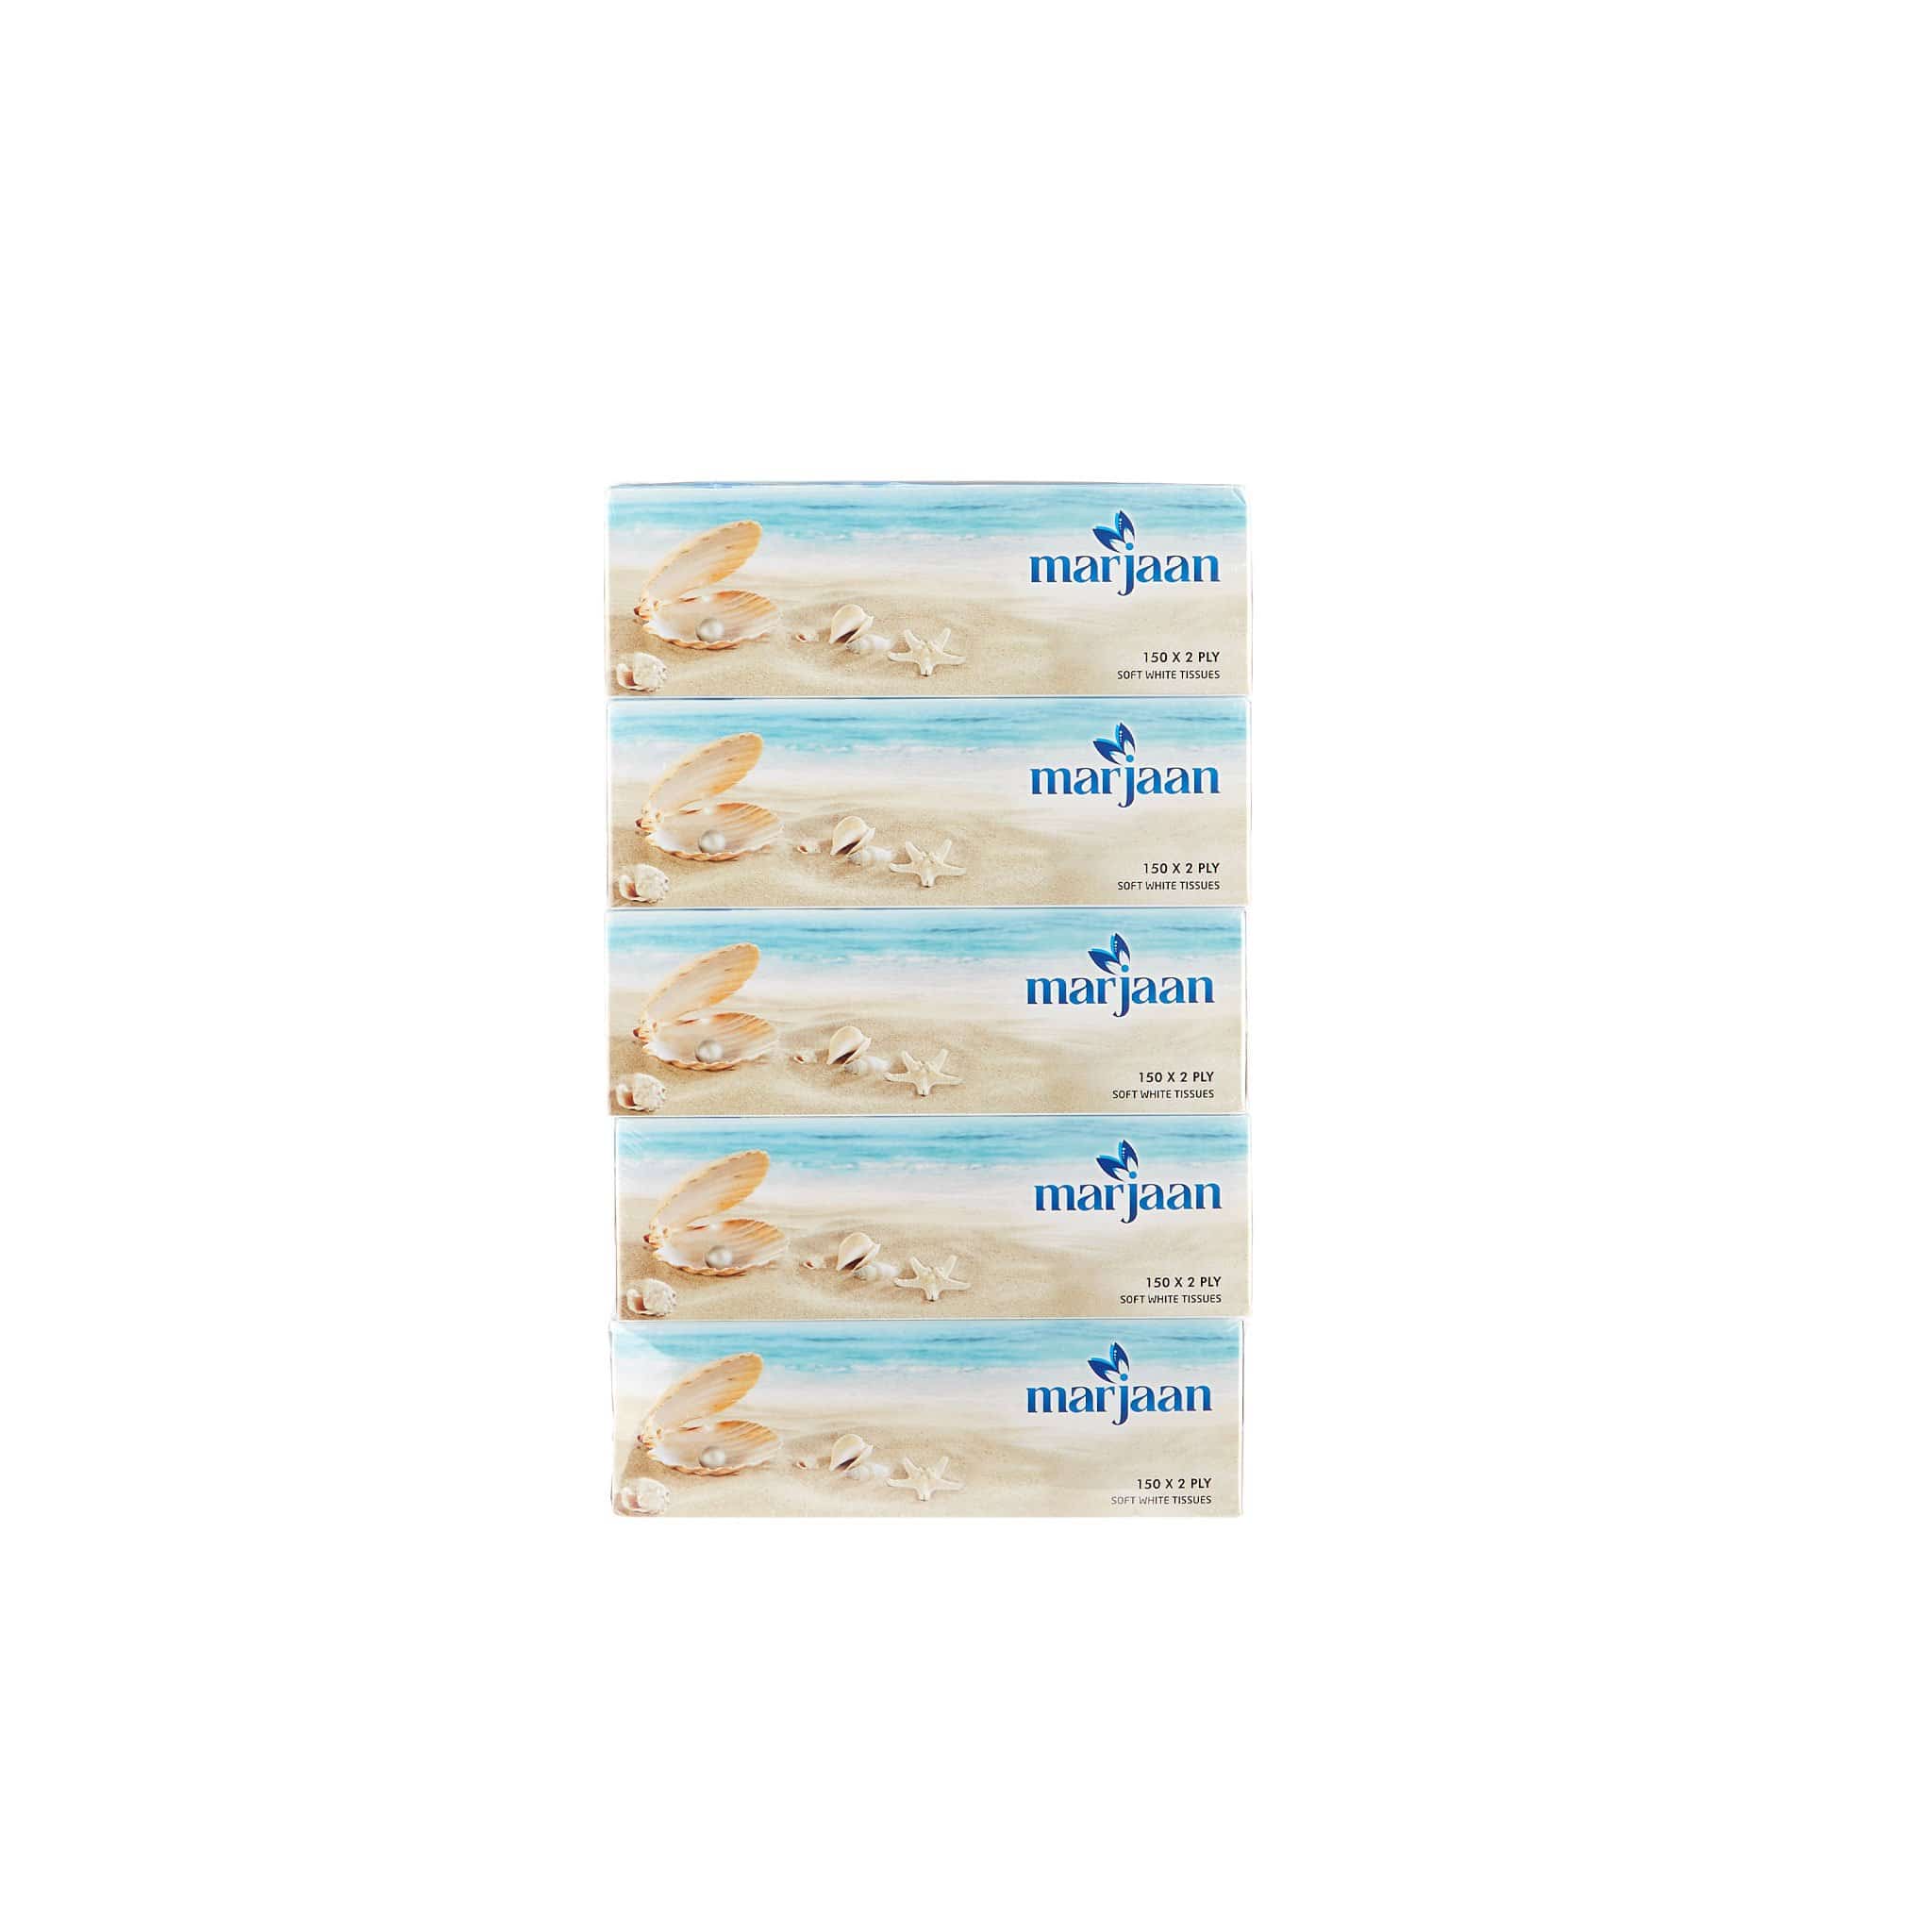 30 Pieces Marjaan Facial Tissue 200 Sheets X 2 Ply